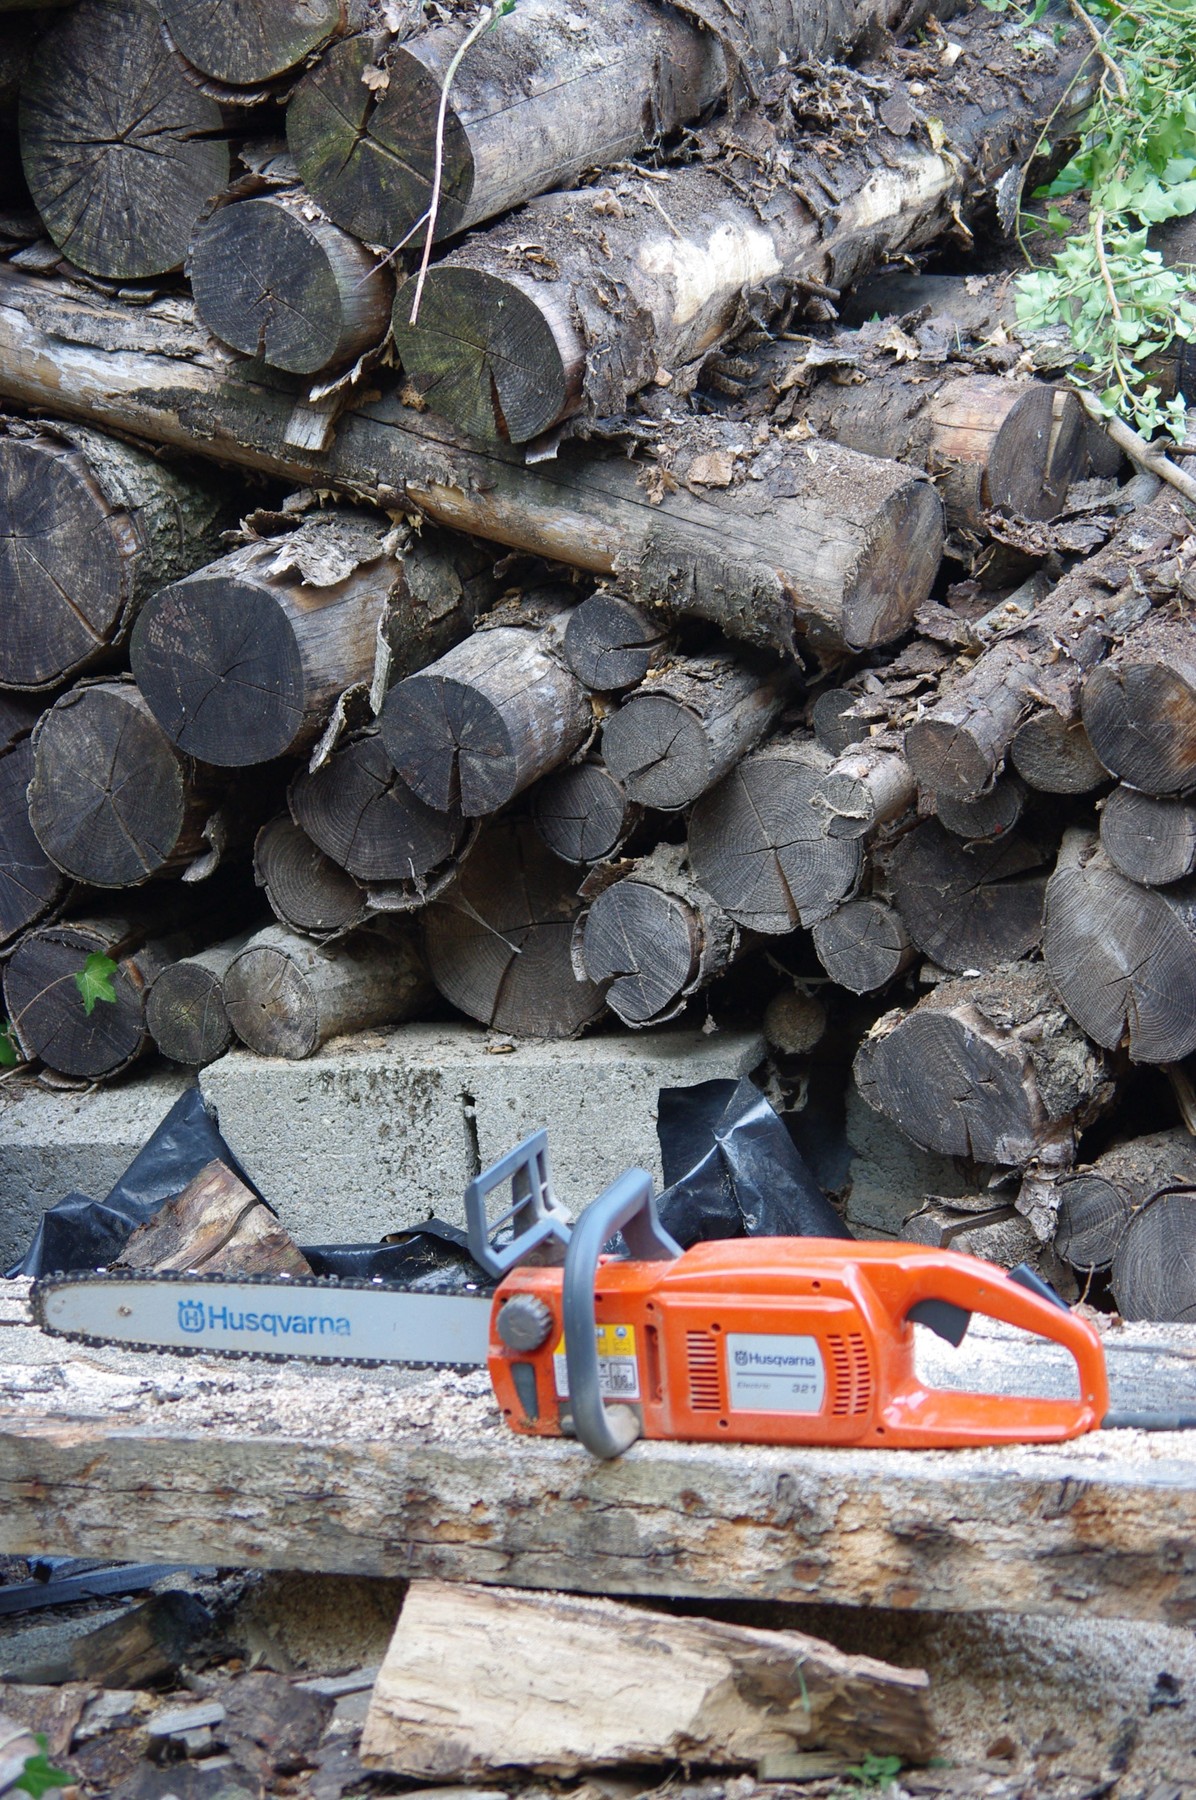 Chain saw in front of a stack of logs | balise42  -  Foter  -  CC BY-SA